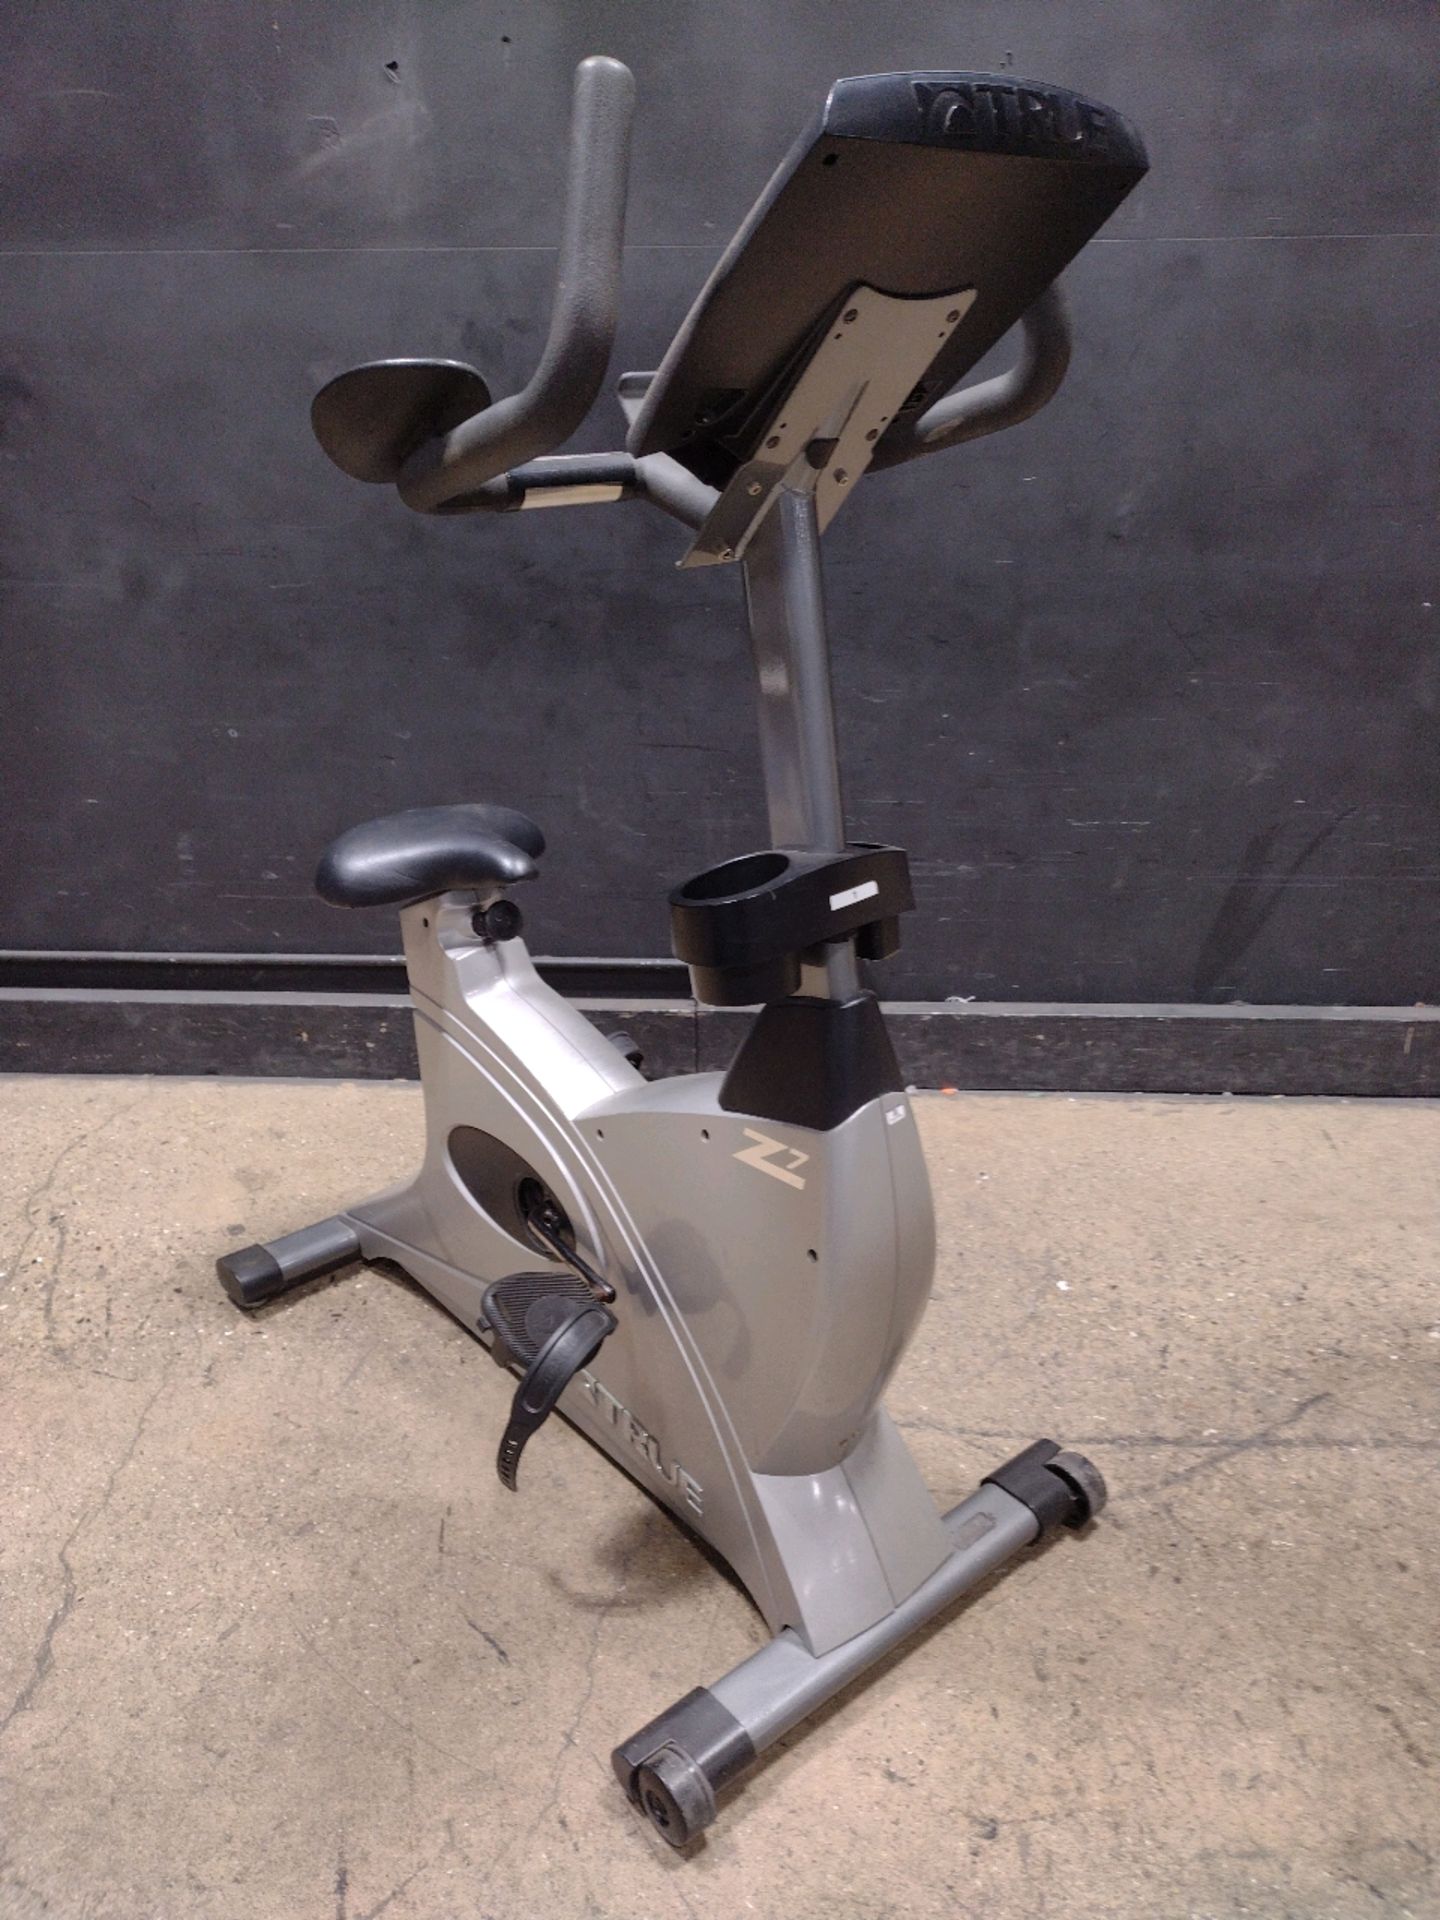 TRUE Z7 RECUMBENT BIKE (LOCATED AT 3325 MOUNT PROSPECT ROAD, FRANKLIN PARK, IL, 60131) - Image 3 of 3